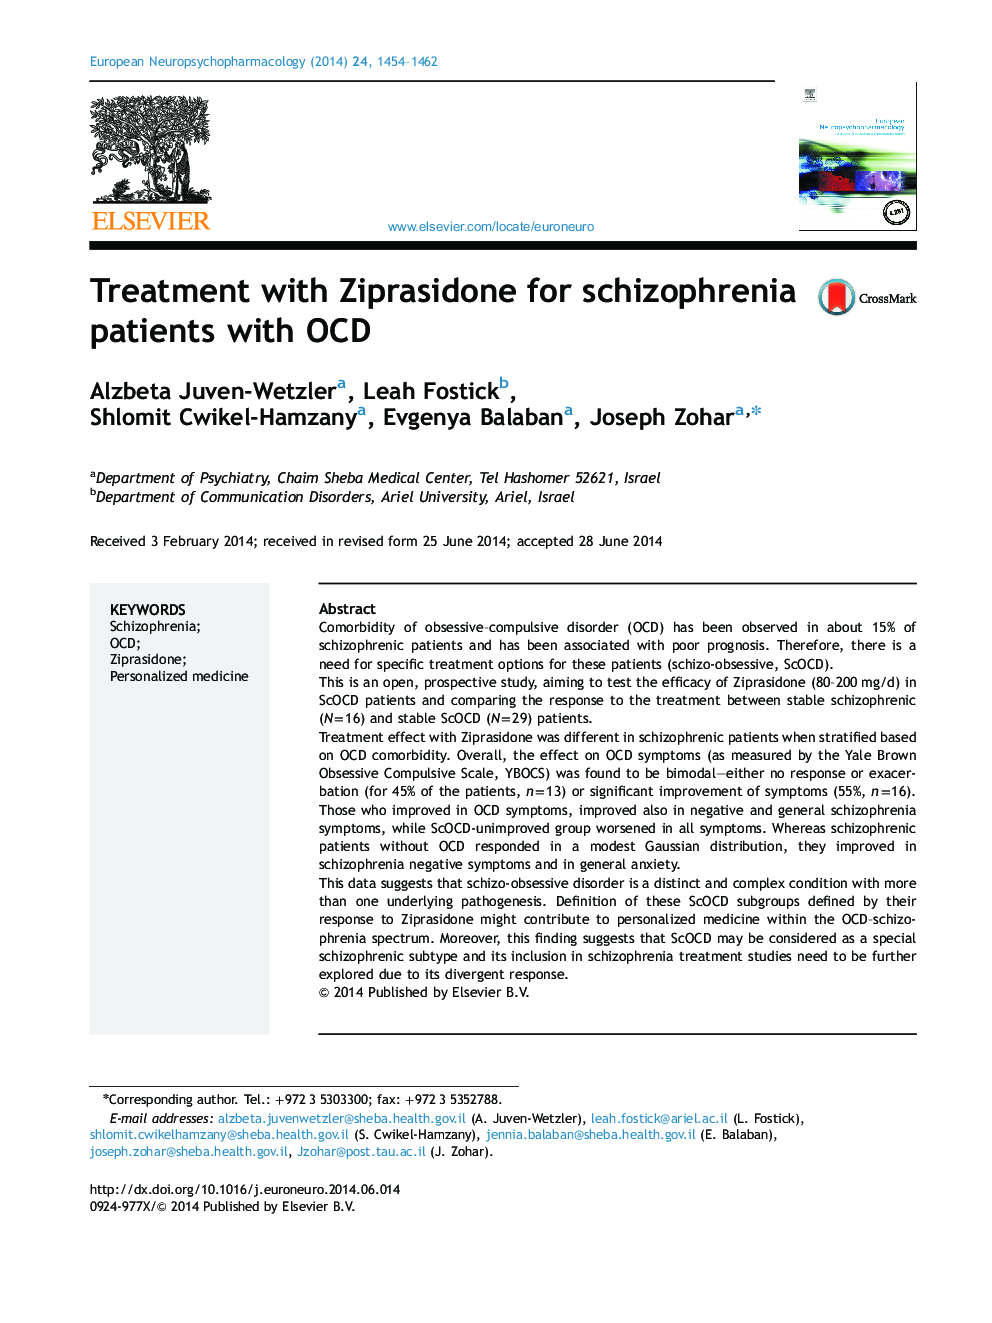 Treatment with Ziprasidone for schizophrenia patients with OCD